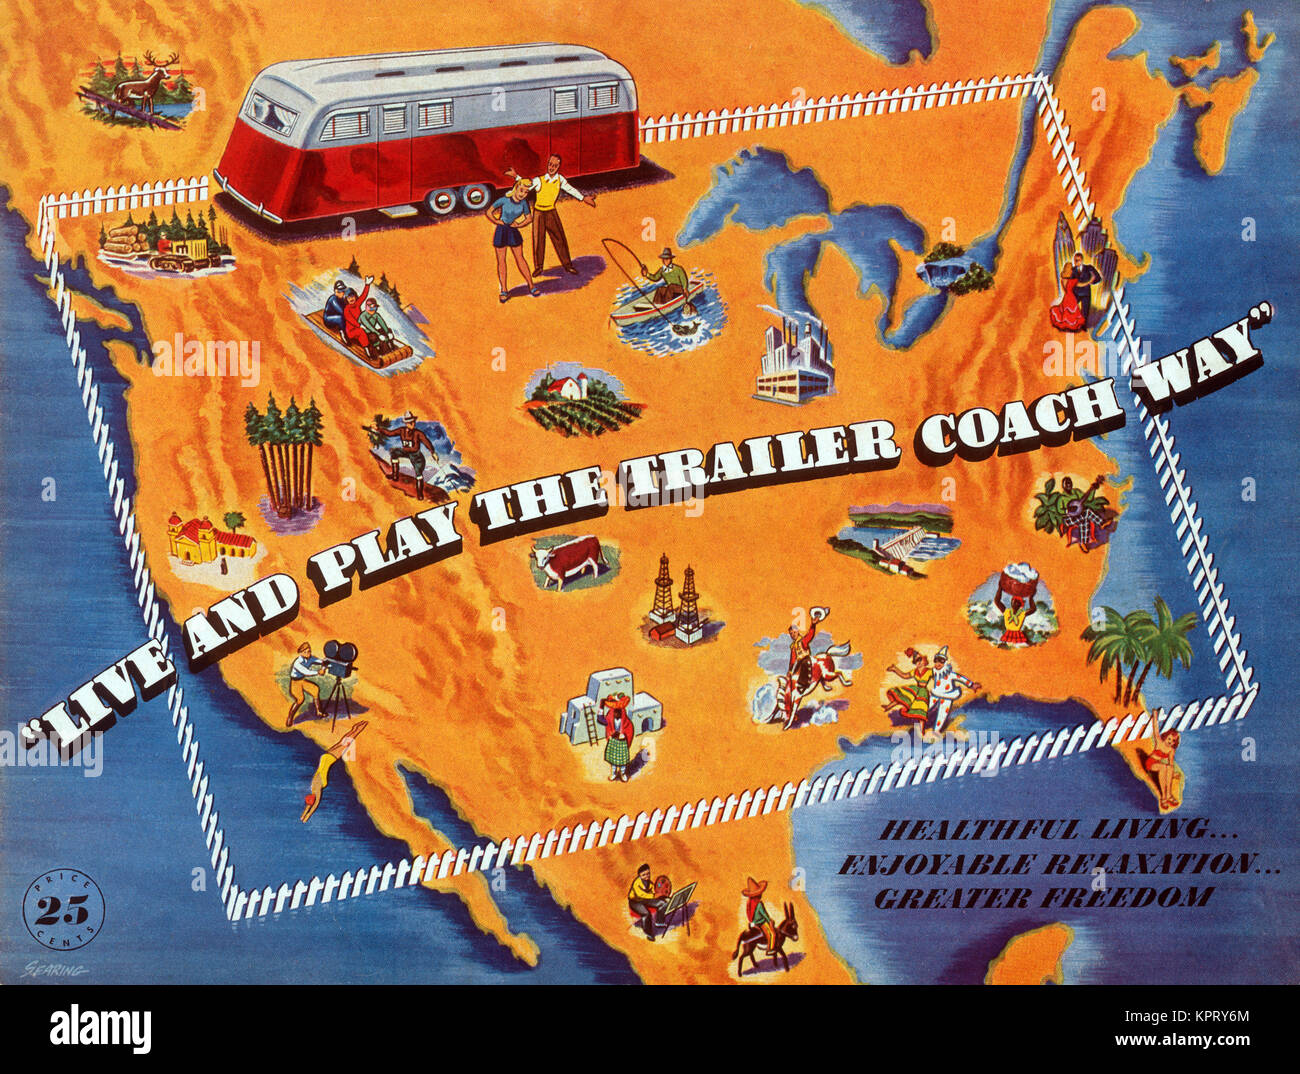 Live and Play the Trailer Coach Way Stock Photo